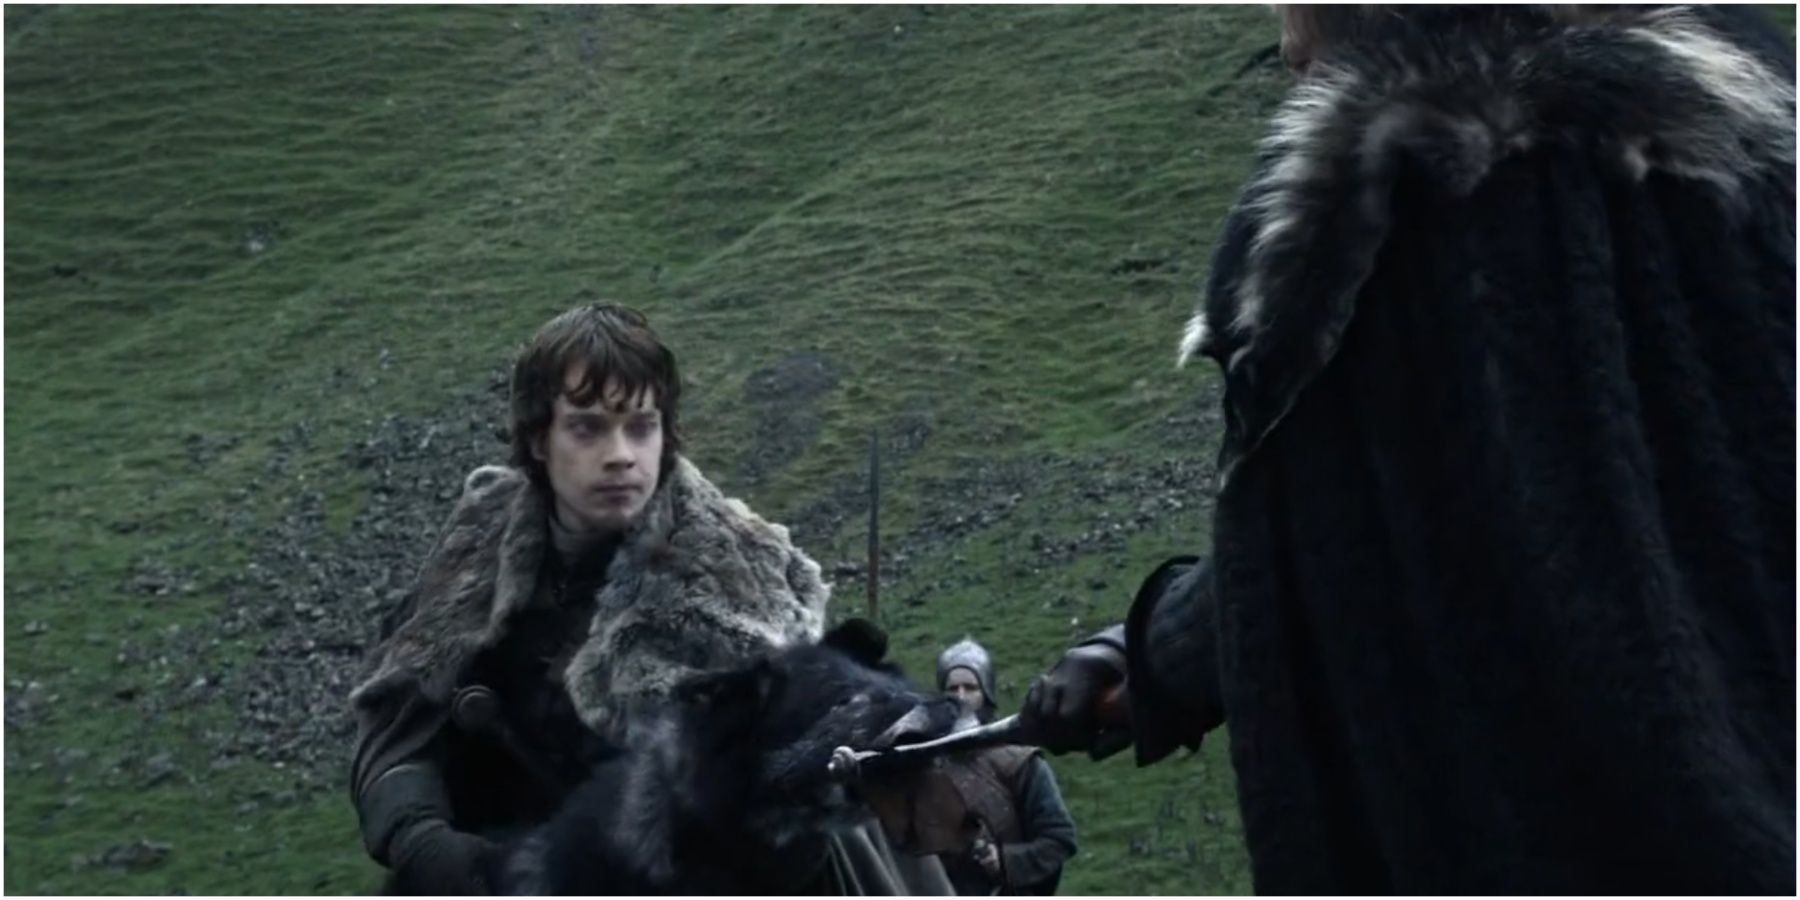 Theon Greyjoy holds the scabbard and Eddard draws Ice in Game of Thrones.